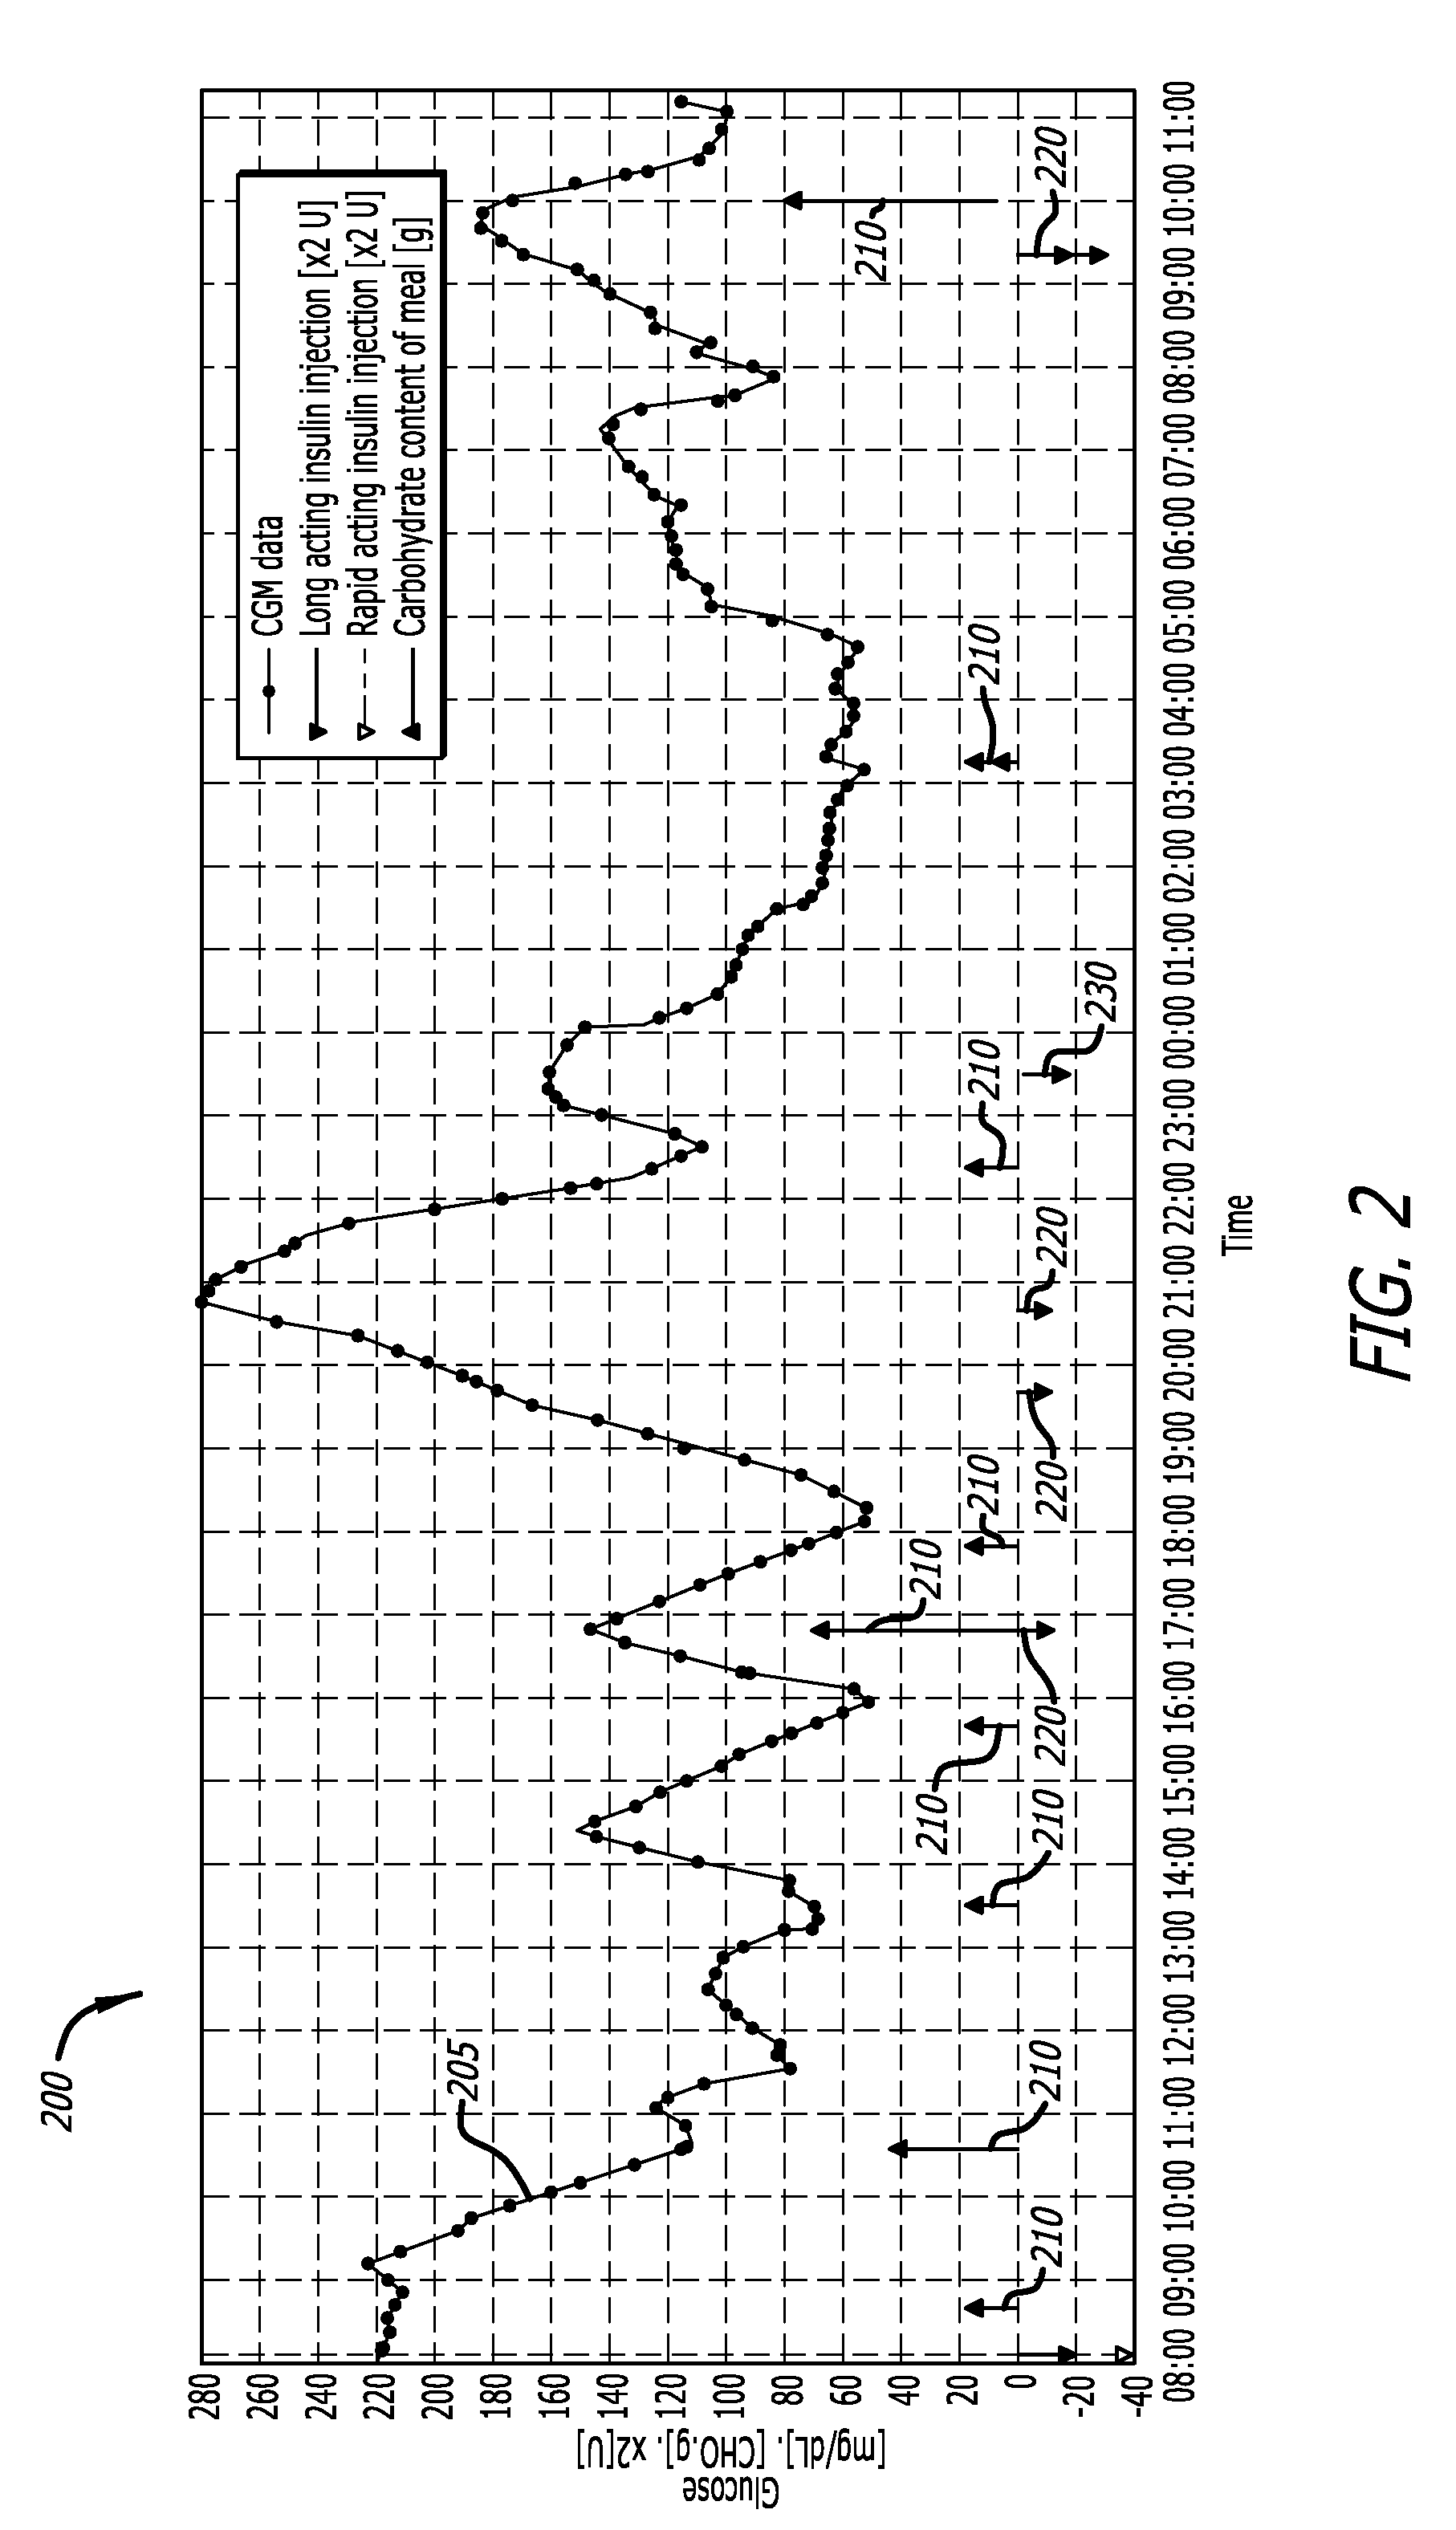 Methods for reducing false hypoglycemia alarm occurrence